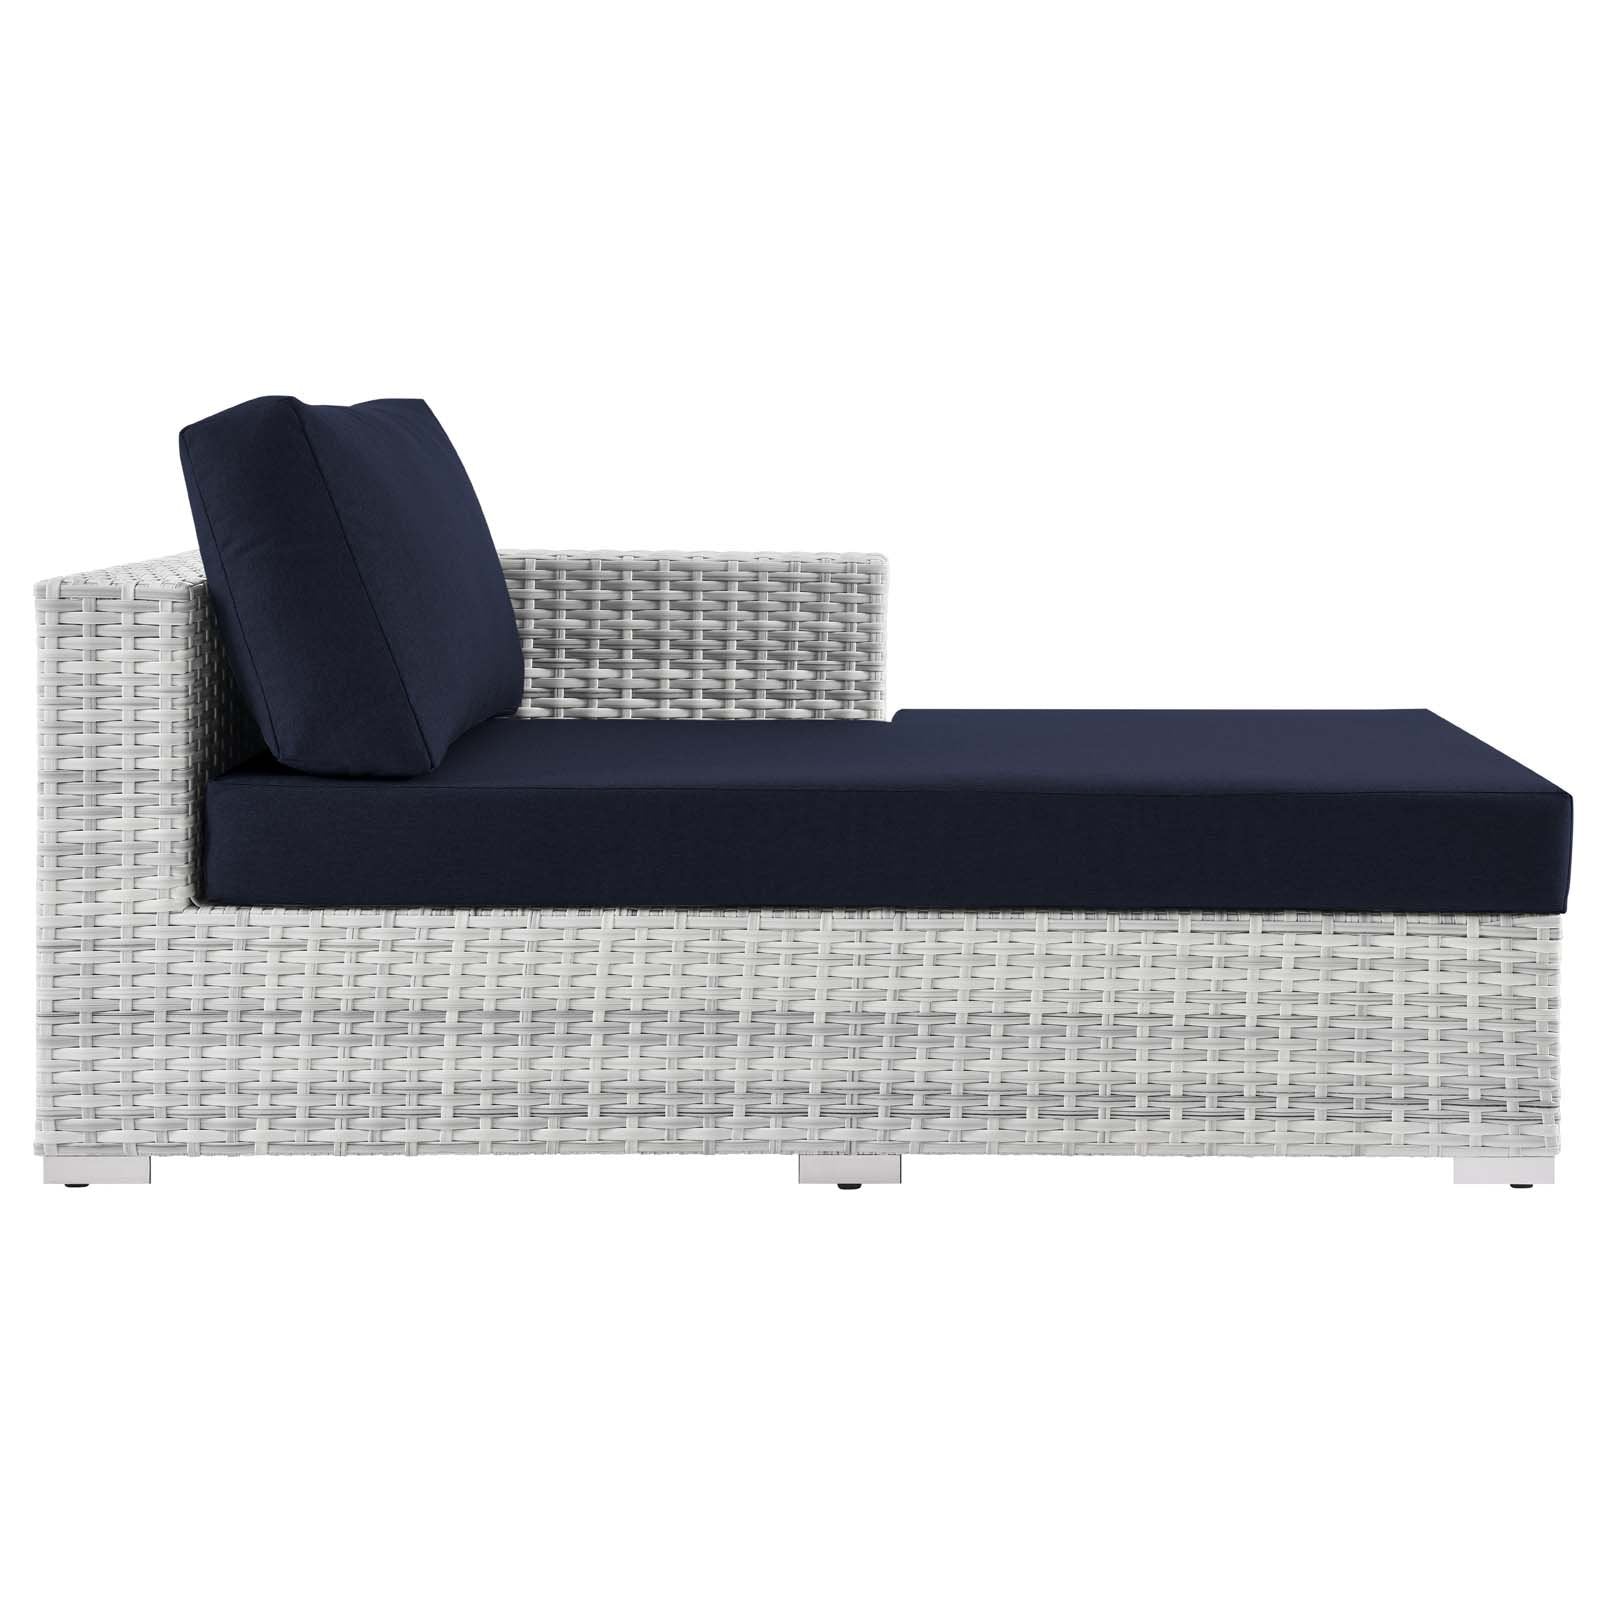 Convene Outdoor Patio Right Chaise - East Shore Modern Home Furnishings